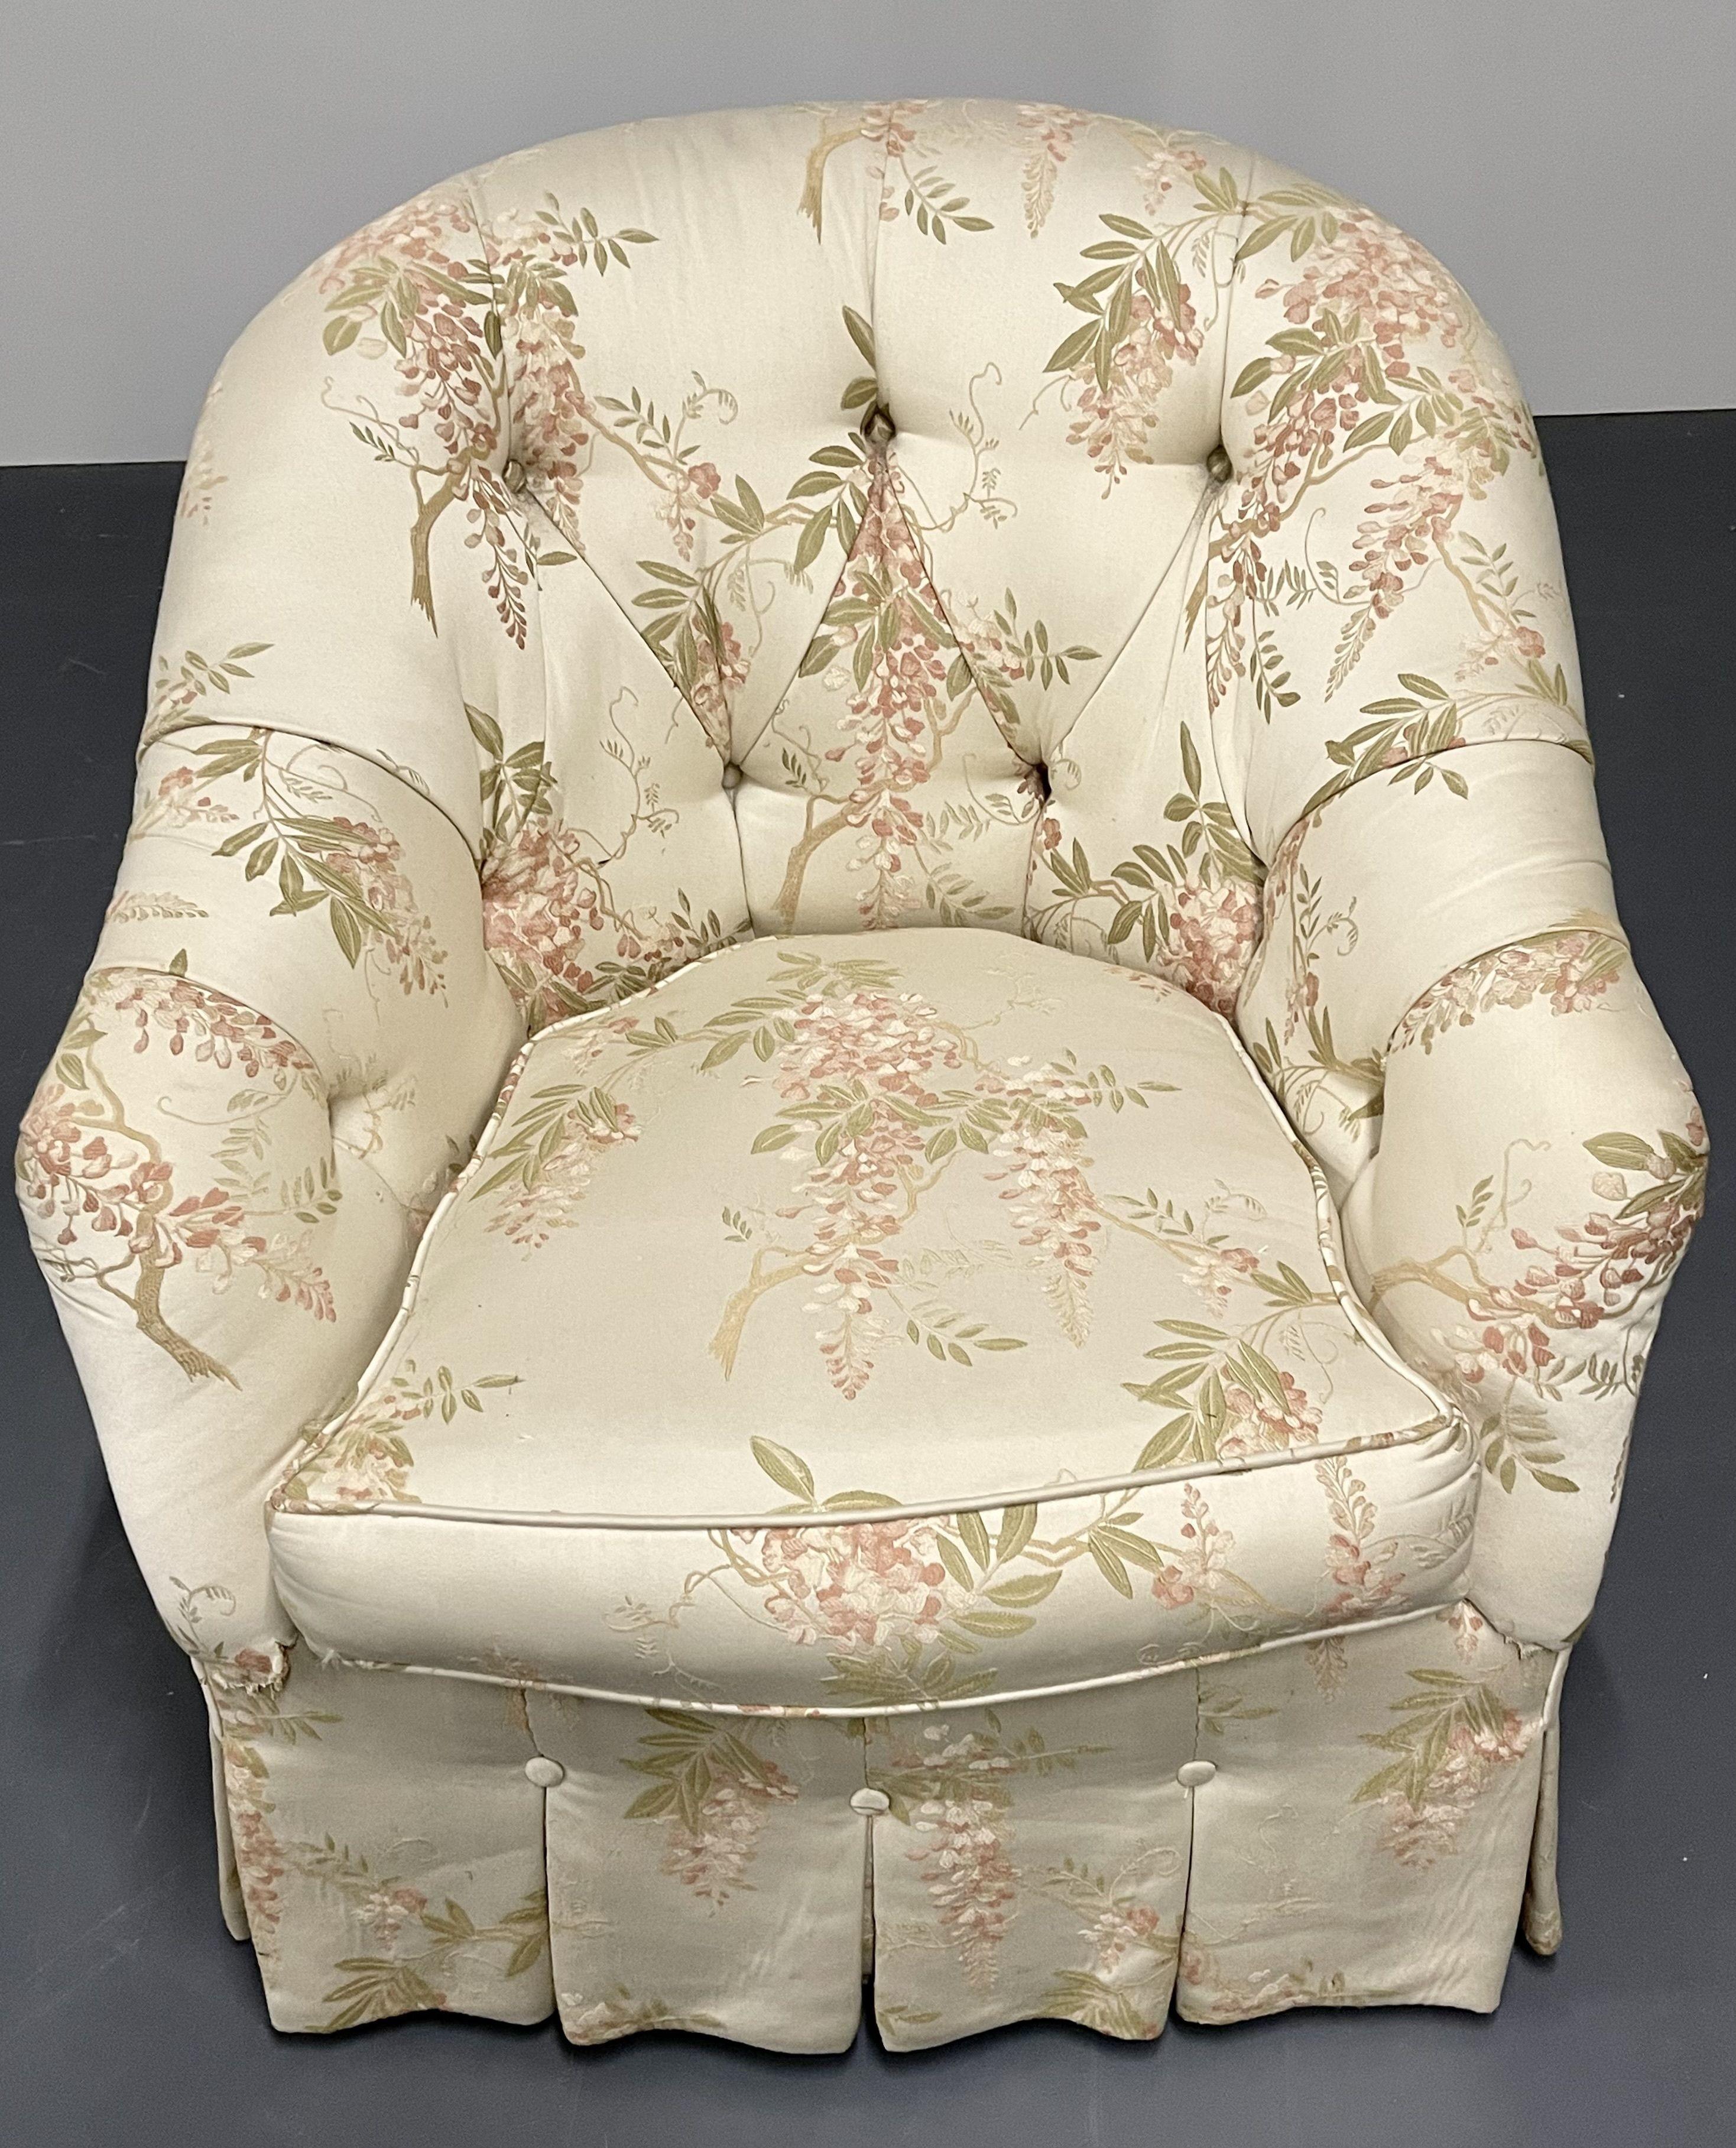 American Pair of Floral Swivel Chairs, Milo Baughman, Scalamandré, Lounge Chairs